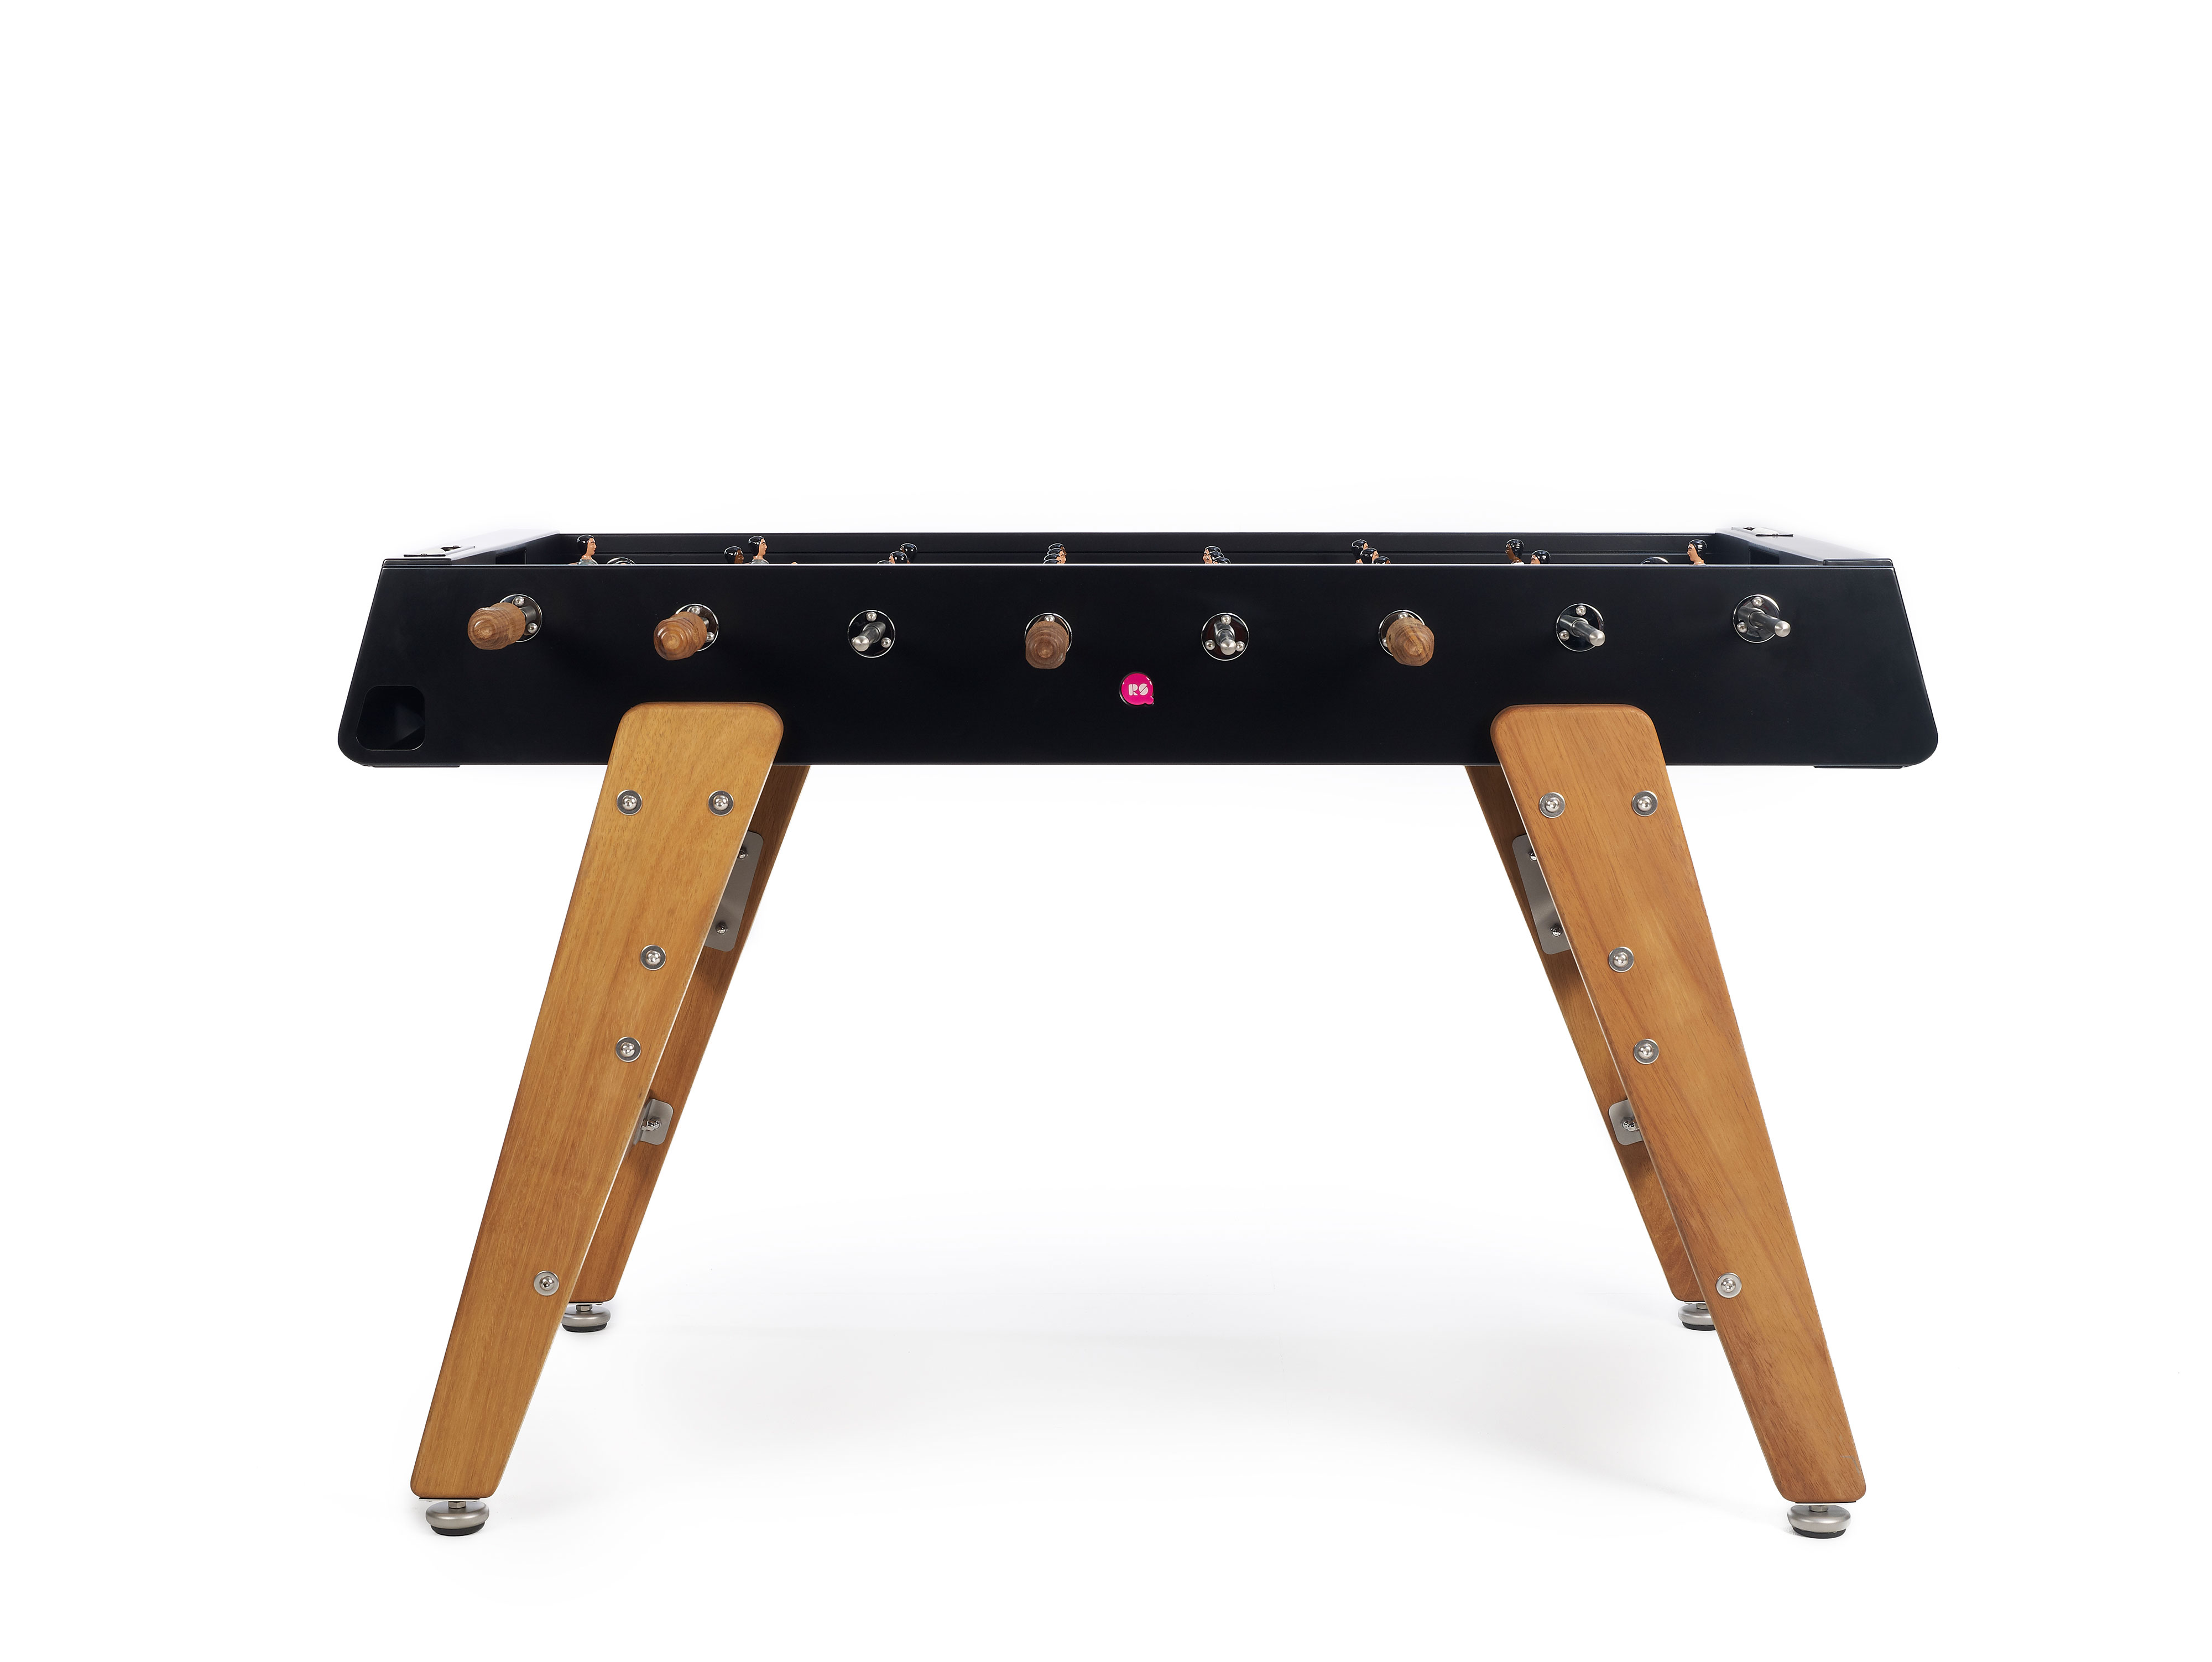 Football table "Allrounder" - design RS-3 Wood from RS Barcelona (in-& outdoor)